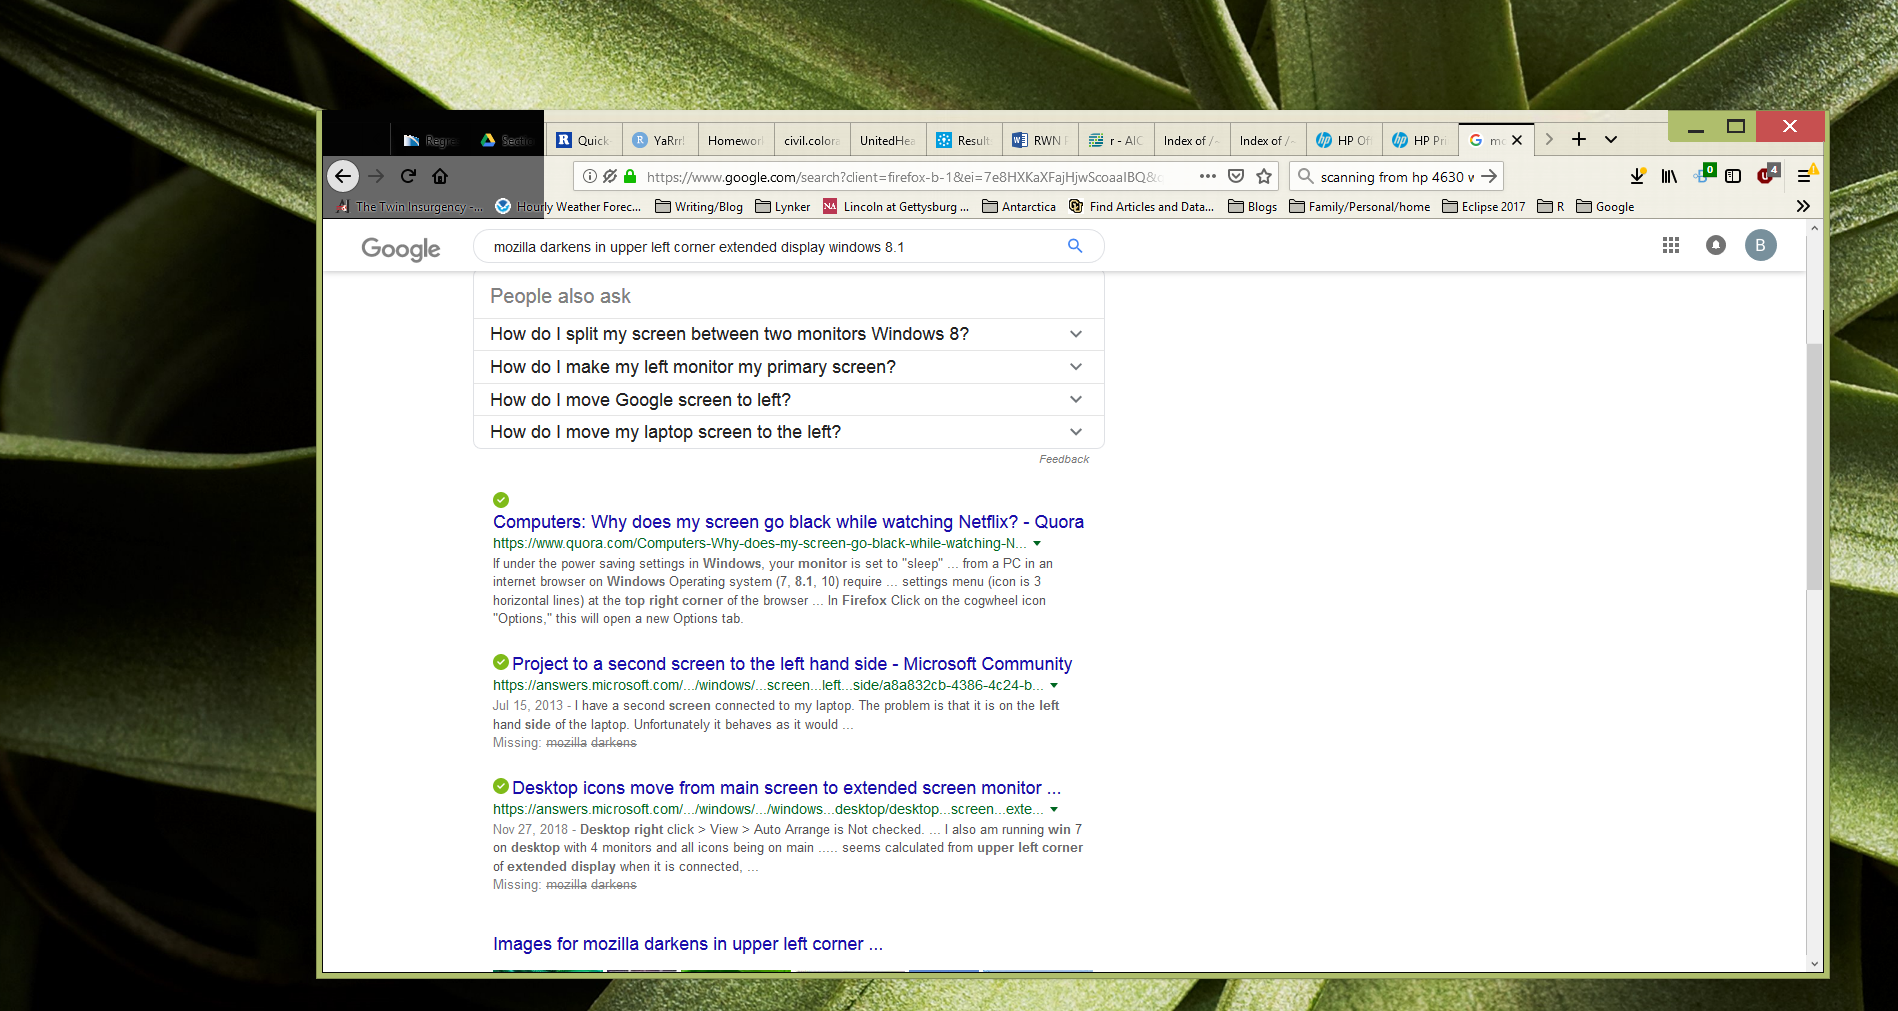 Open Mozilla Firefox
Click the three horizontal lines in the top-right corner of the window